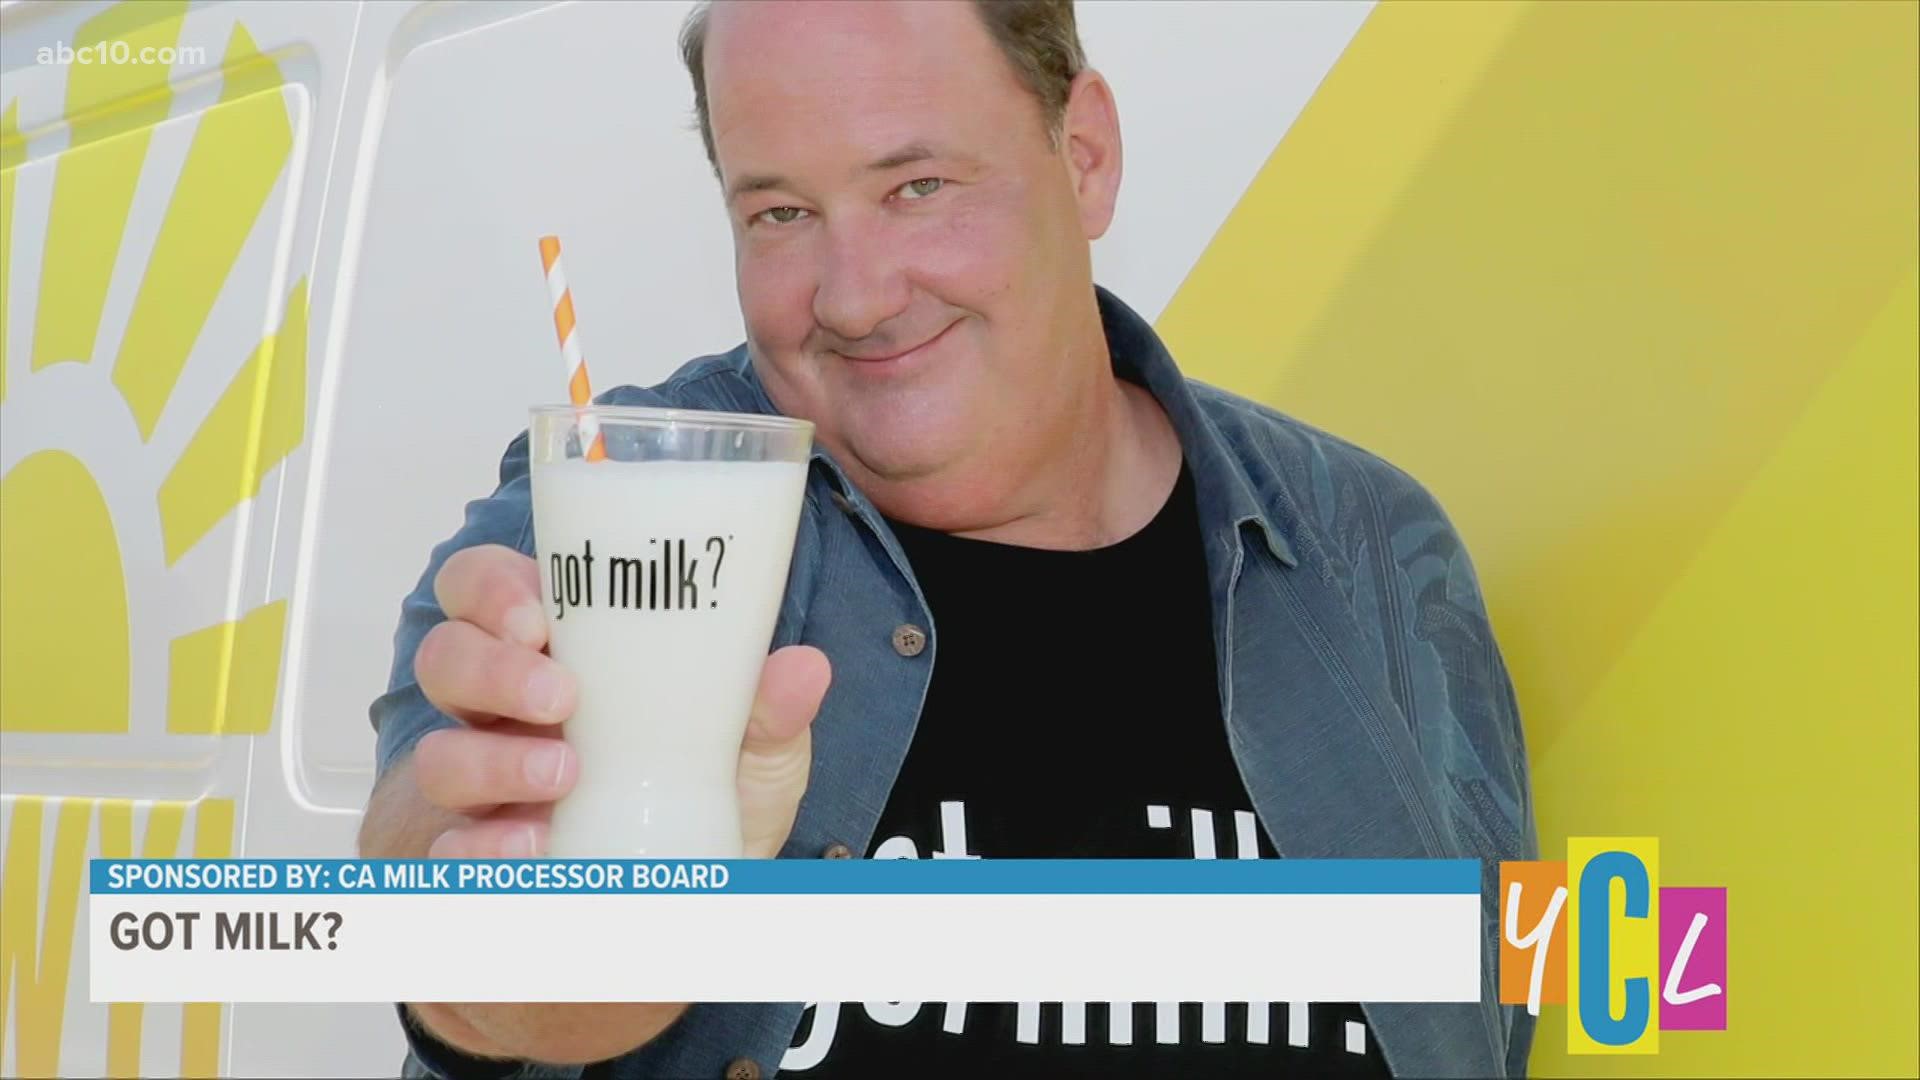 “GOT MILK?” has crafted something clever on misinformation when it comes to milk. This segment paid for by the CA Milk Processor Board.